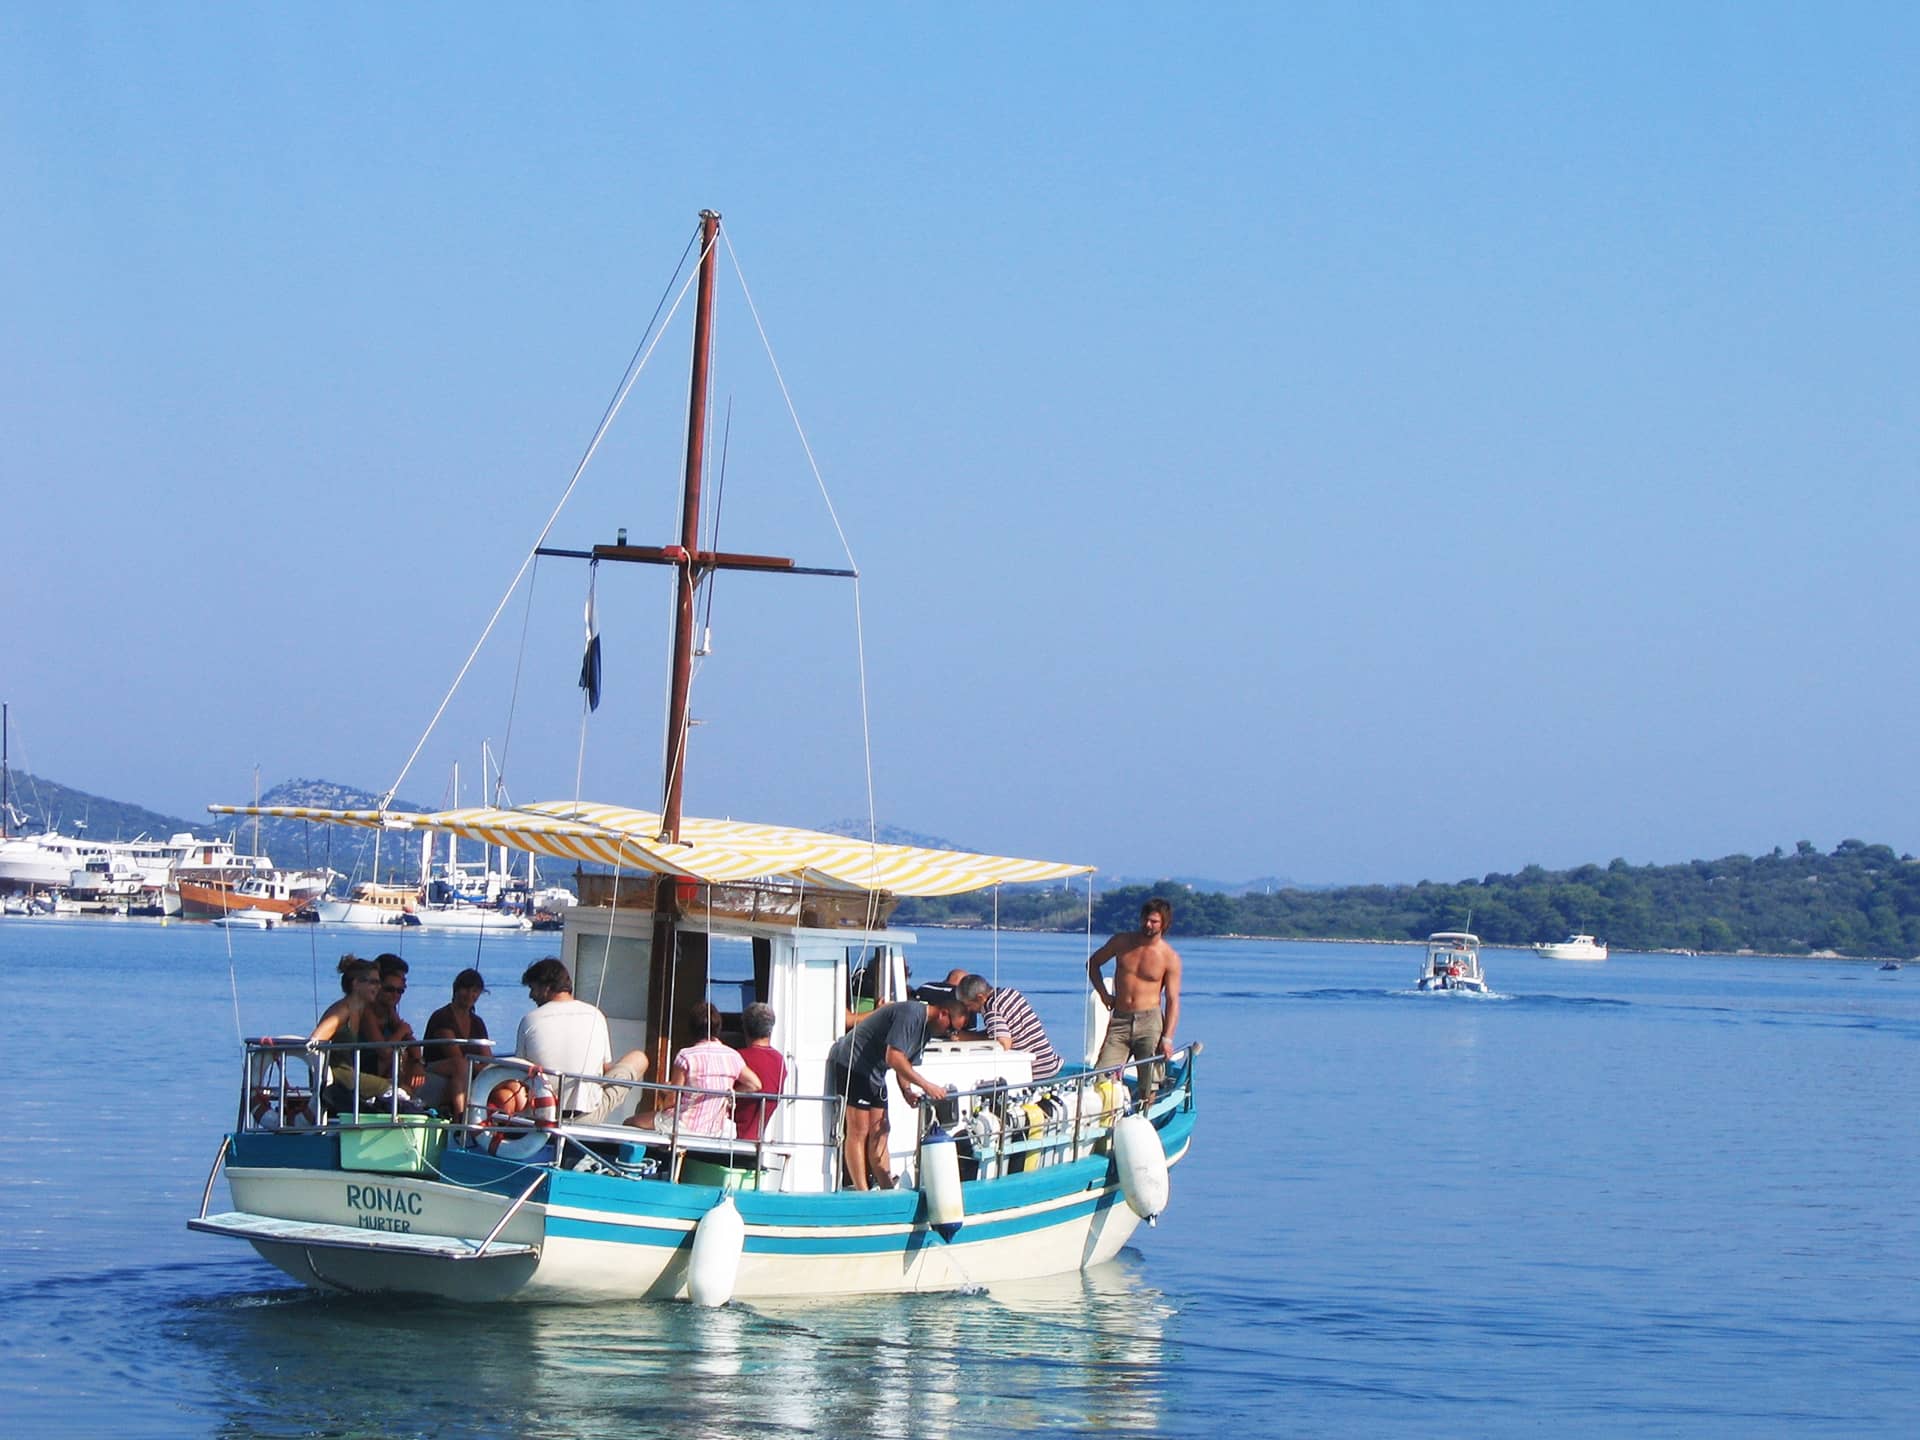 Ronac excursion and diving boat in murter